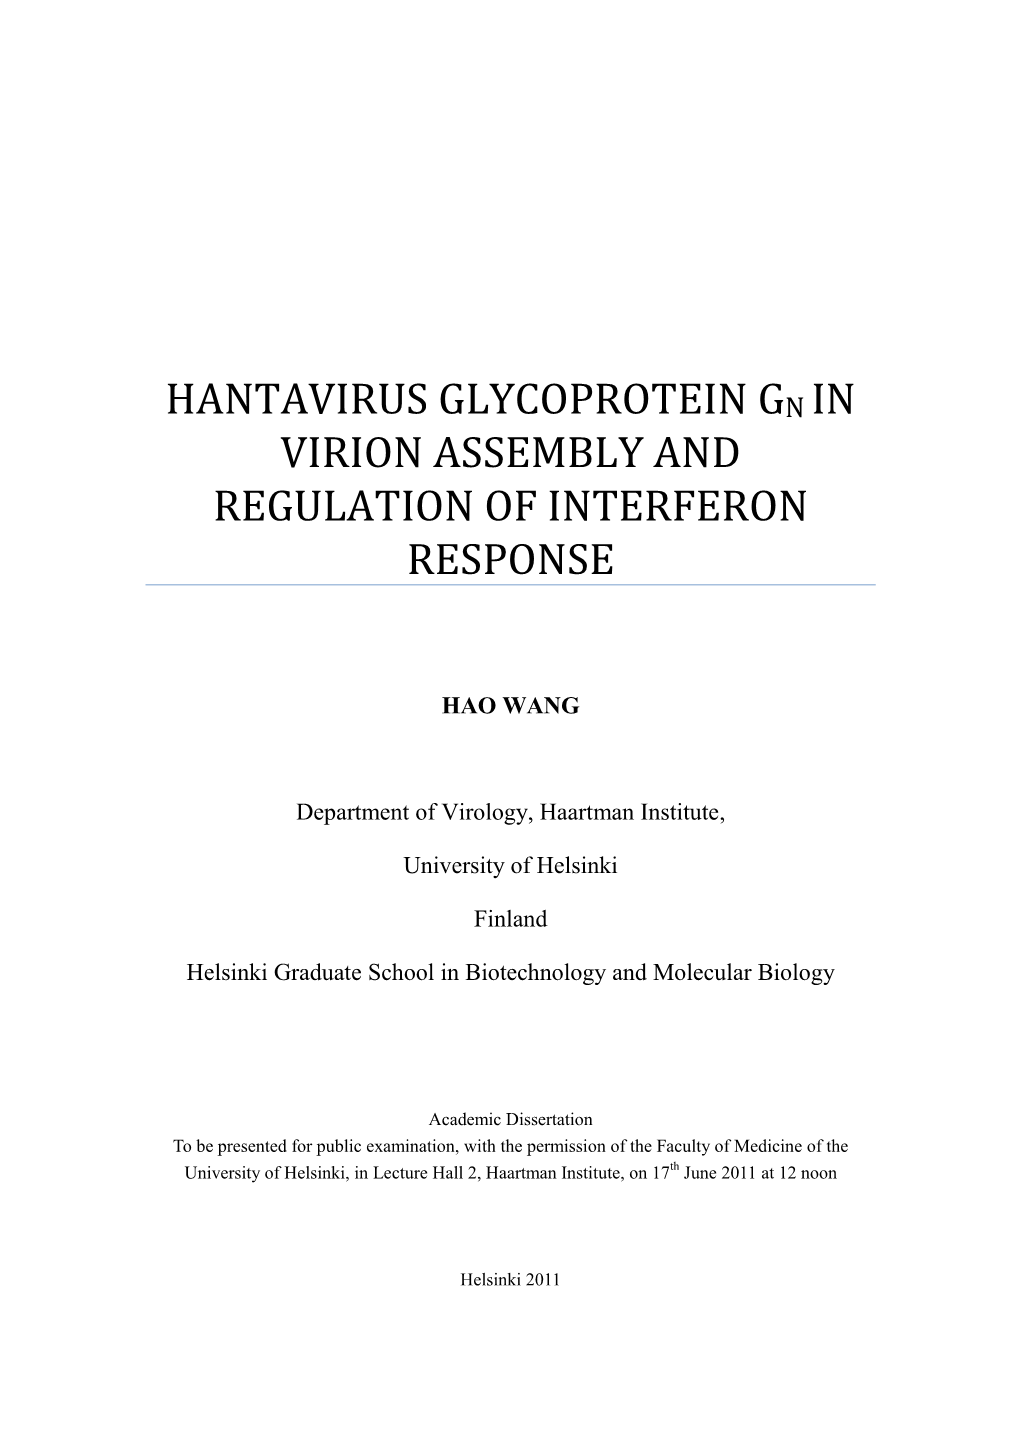 Hantavirus Glycoprotein Gn in Virion Assembly and Regulation of Interferon Response